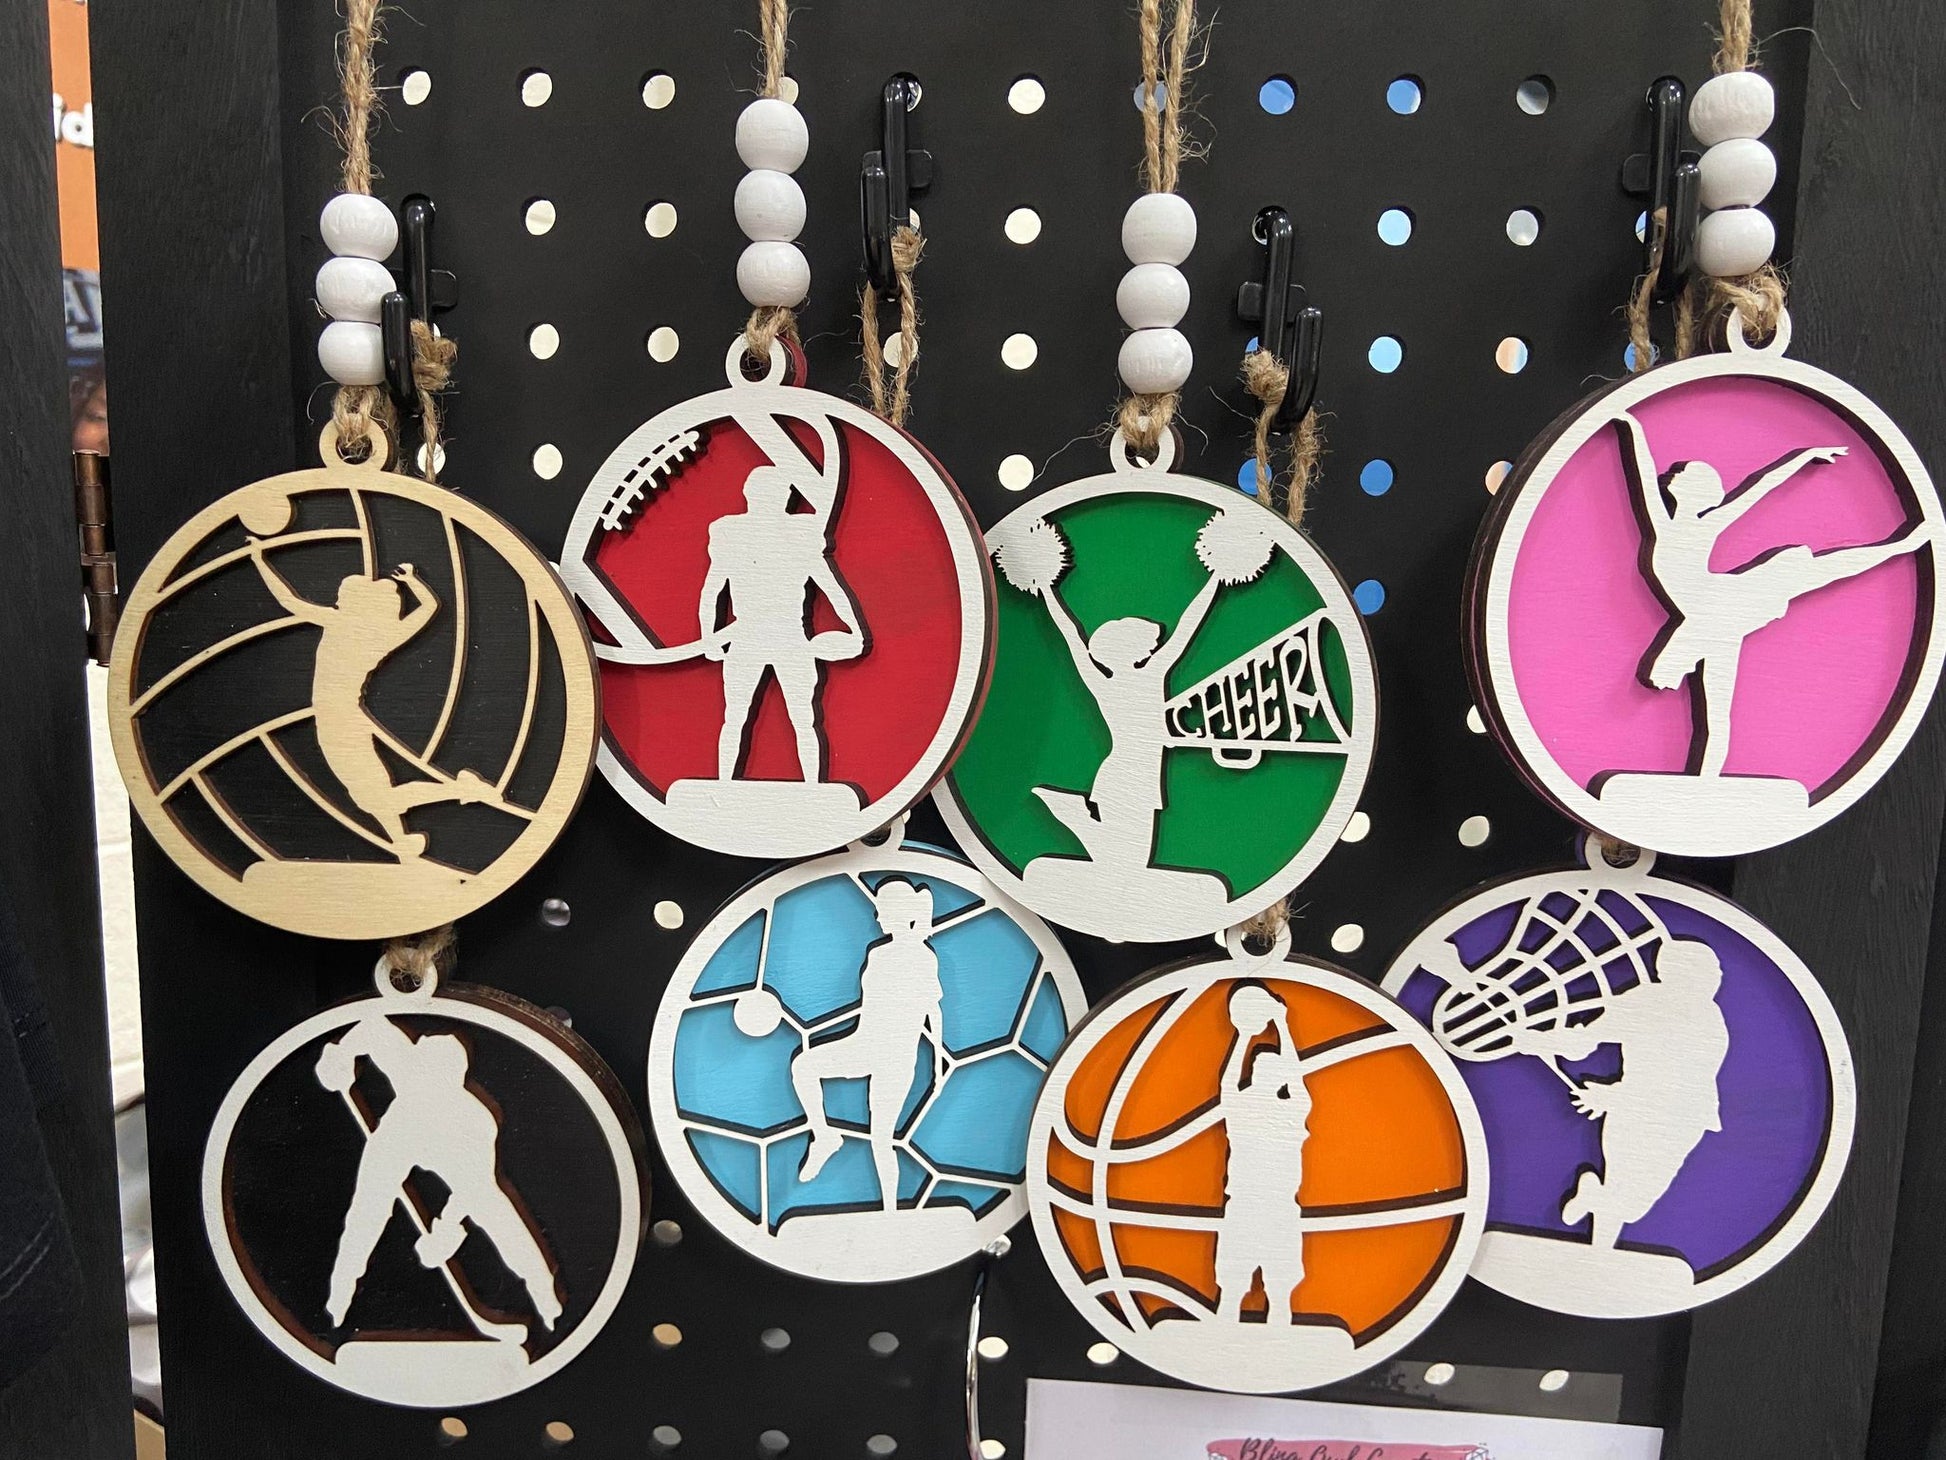 Christmas_ornaments_volleyball_ornaments_football_ornament_cheer_ornament_dance_ornament_soccer_ornament_hockey_ornament_basketball_ornament